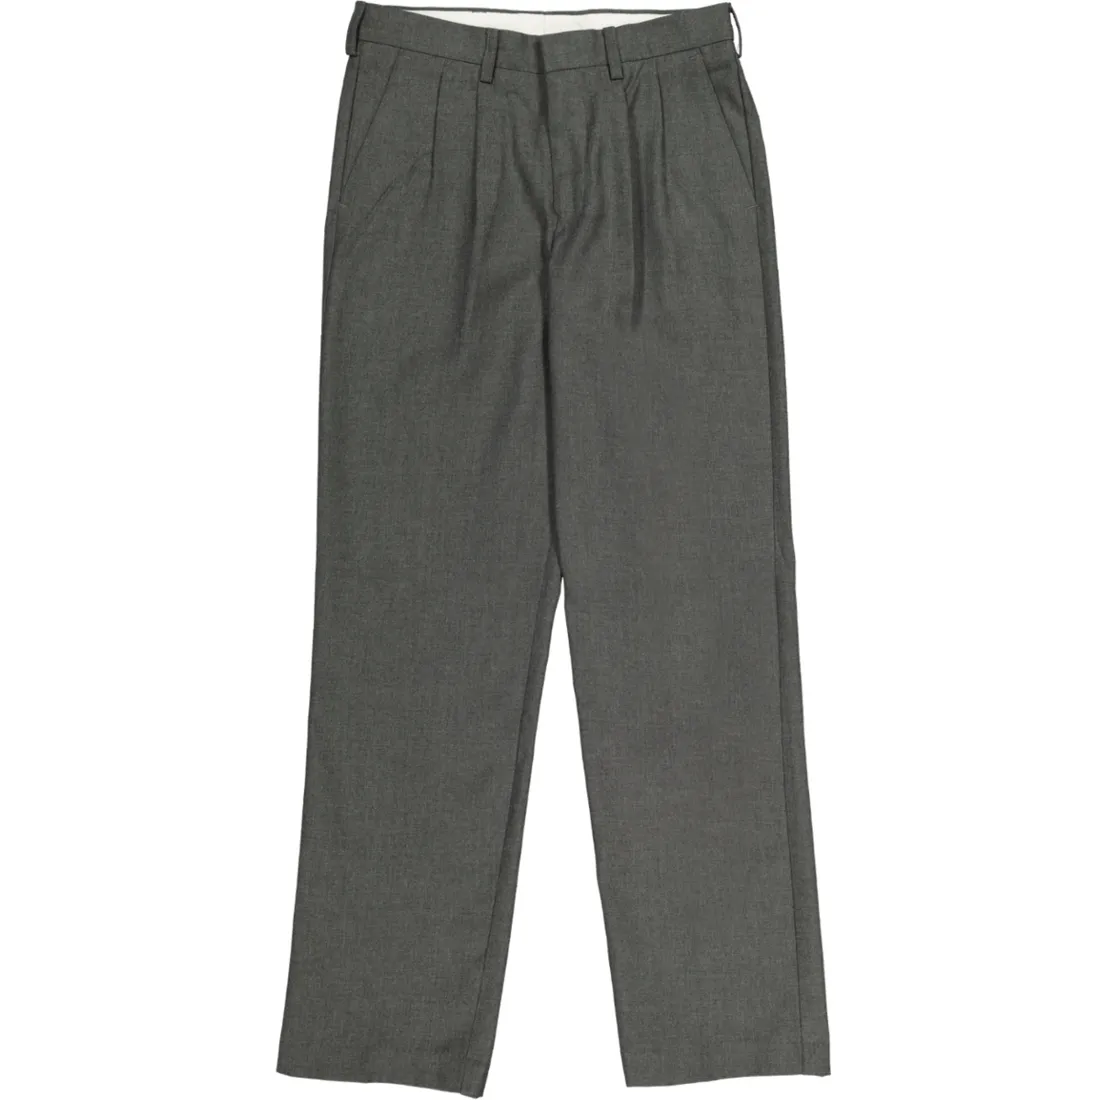 Student Prince Grey Trousers | School | PEP